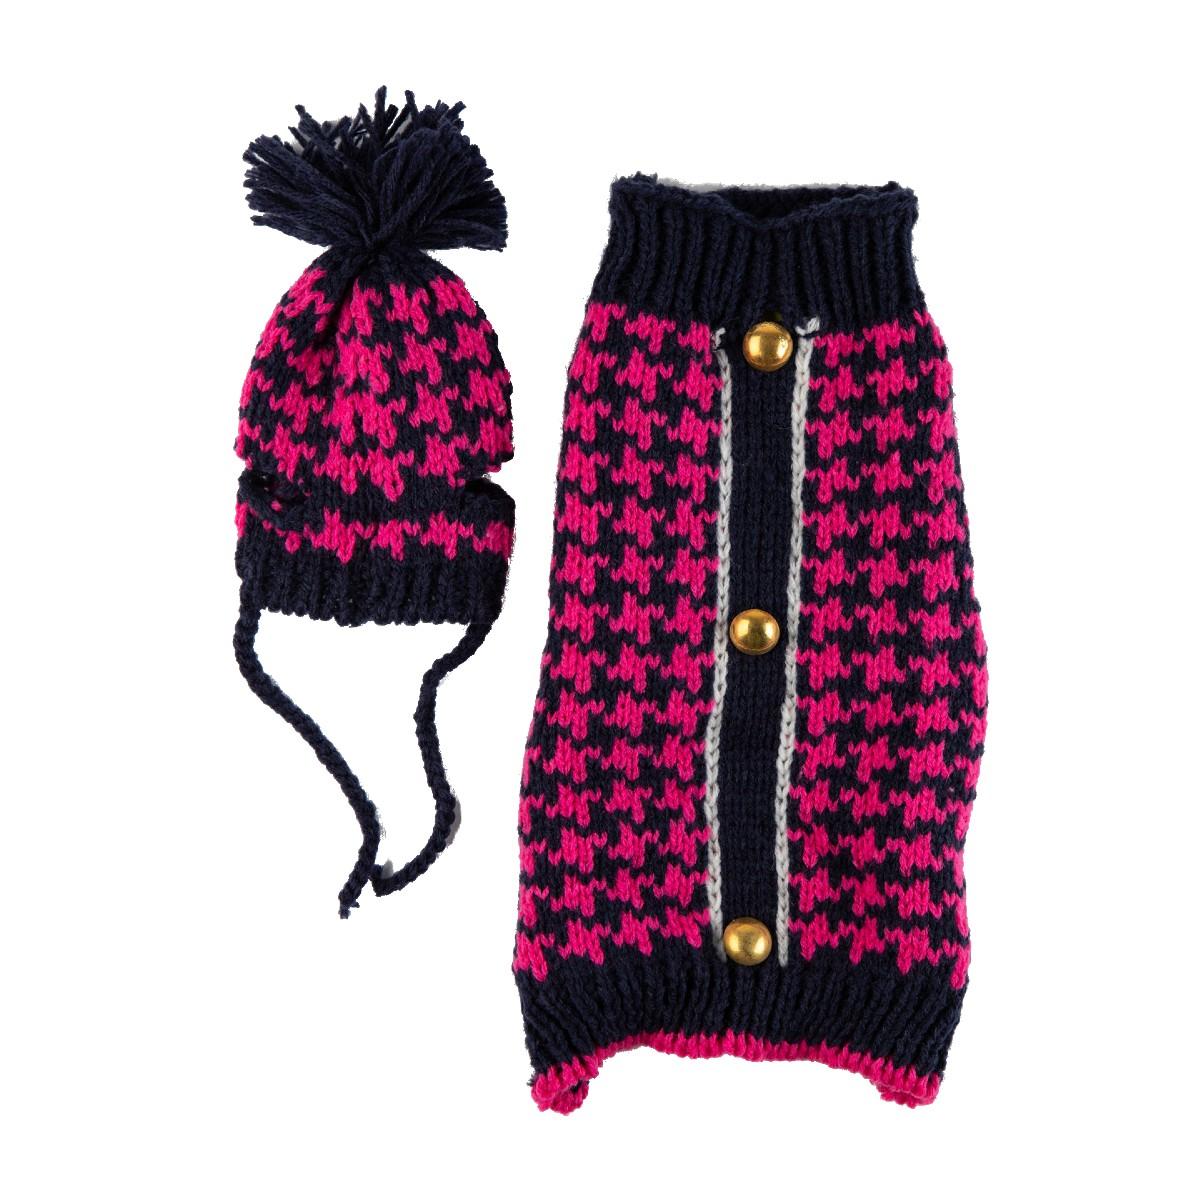 Max's Closet Houndstooth Dog Sweater & Hat Combo - Navy & Hot Pink